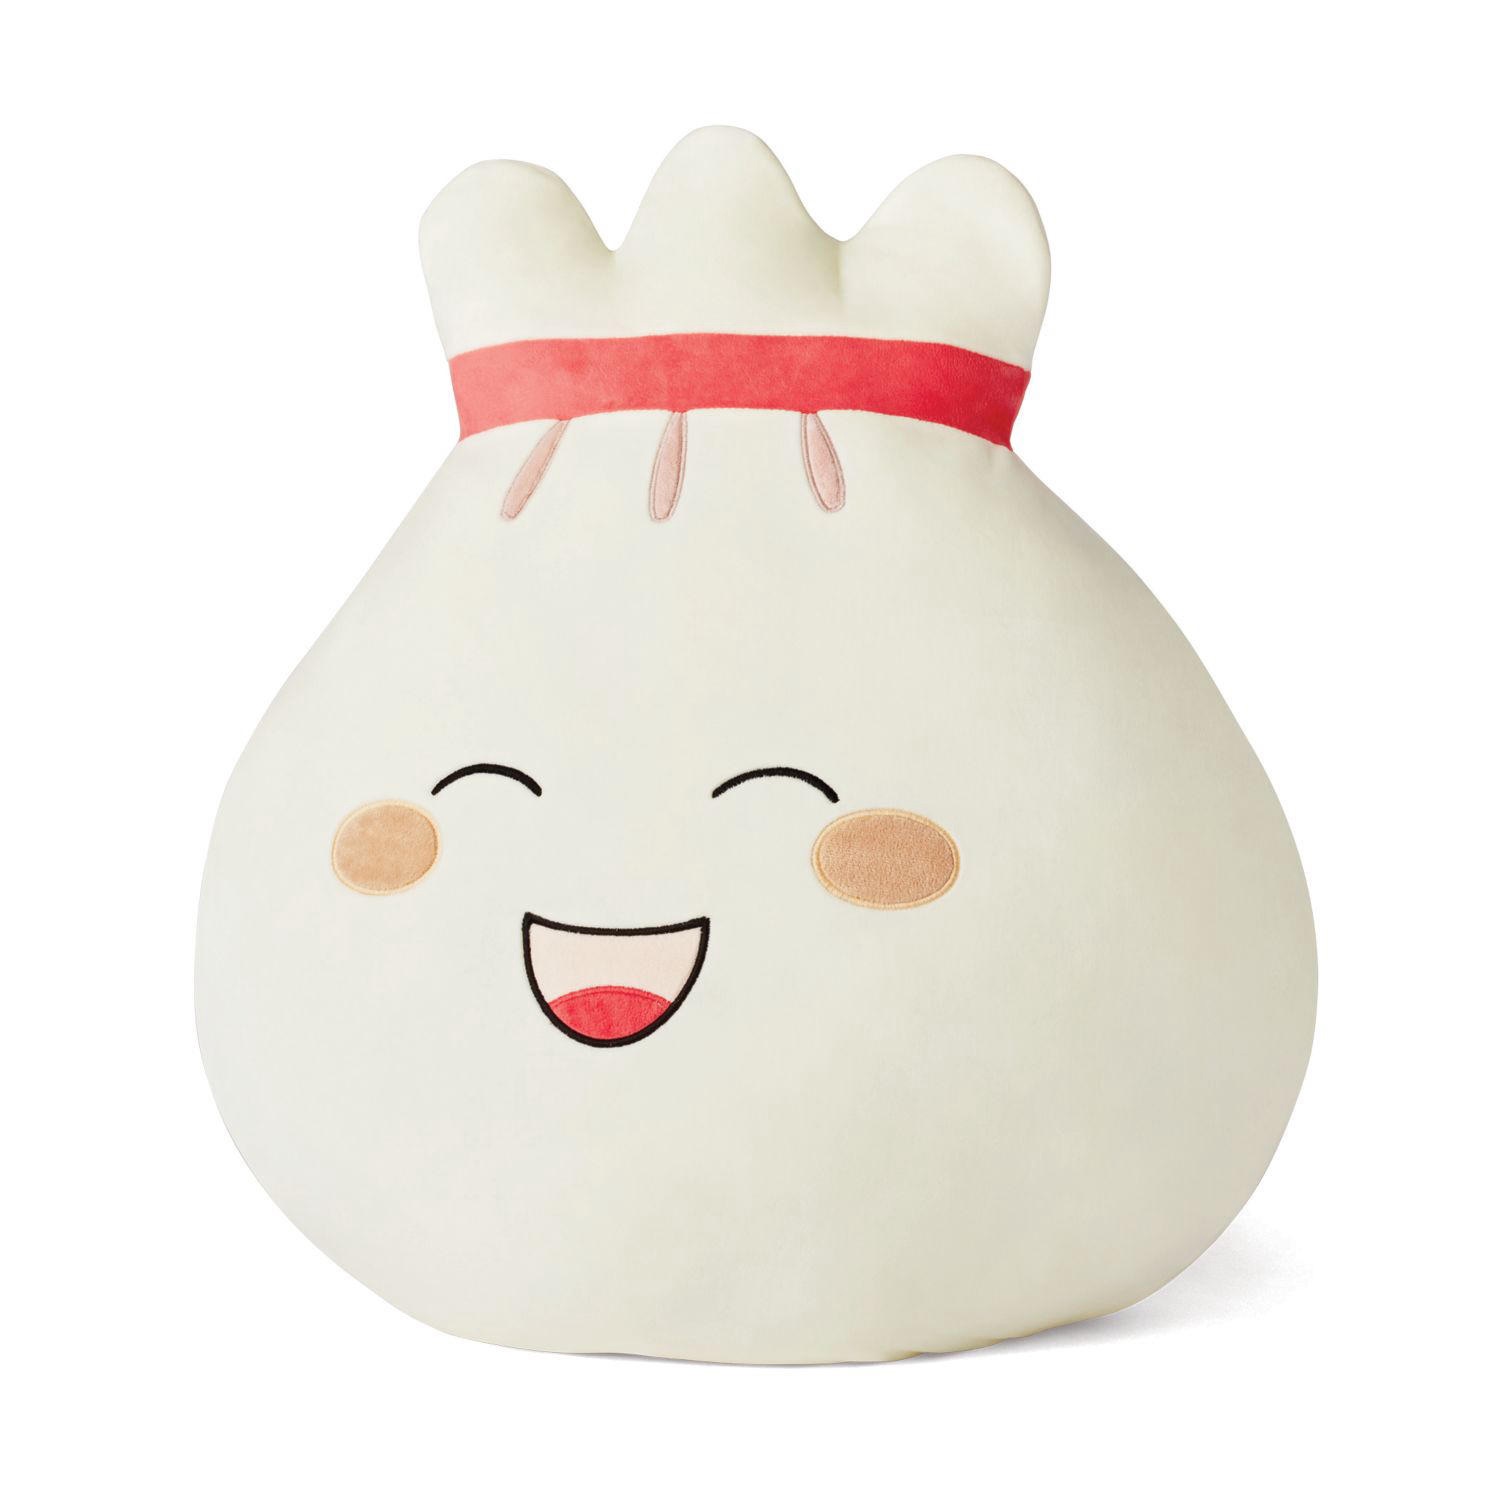 Member's Mark Food Squishie Plush Toy (Assorted Styles) - Sam's Club